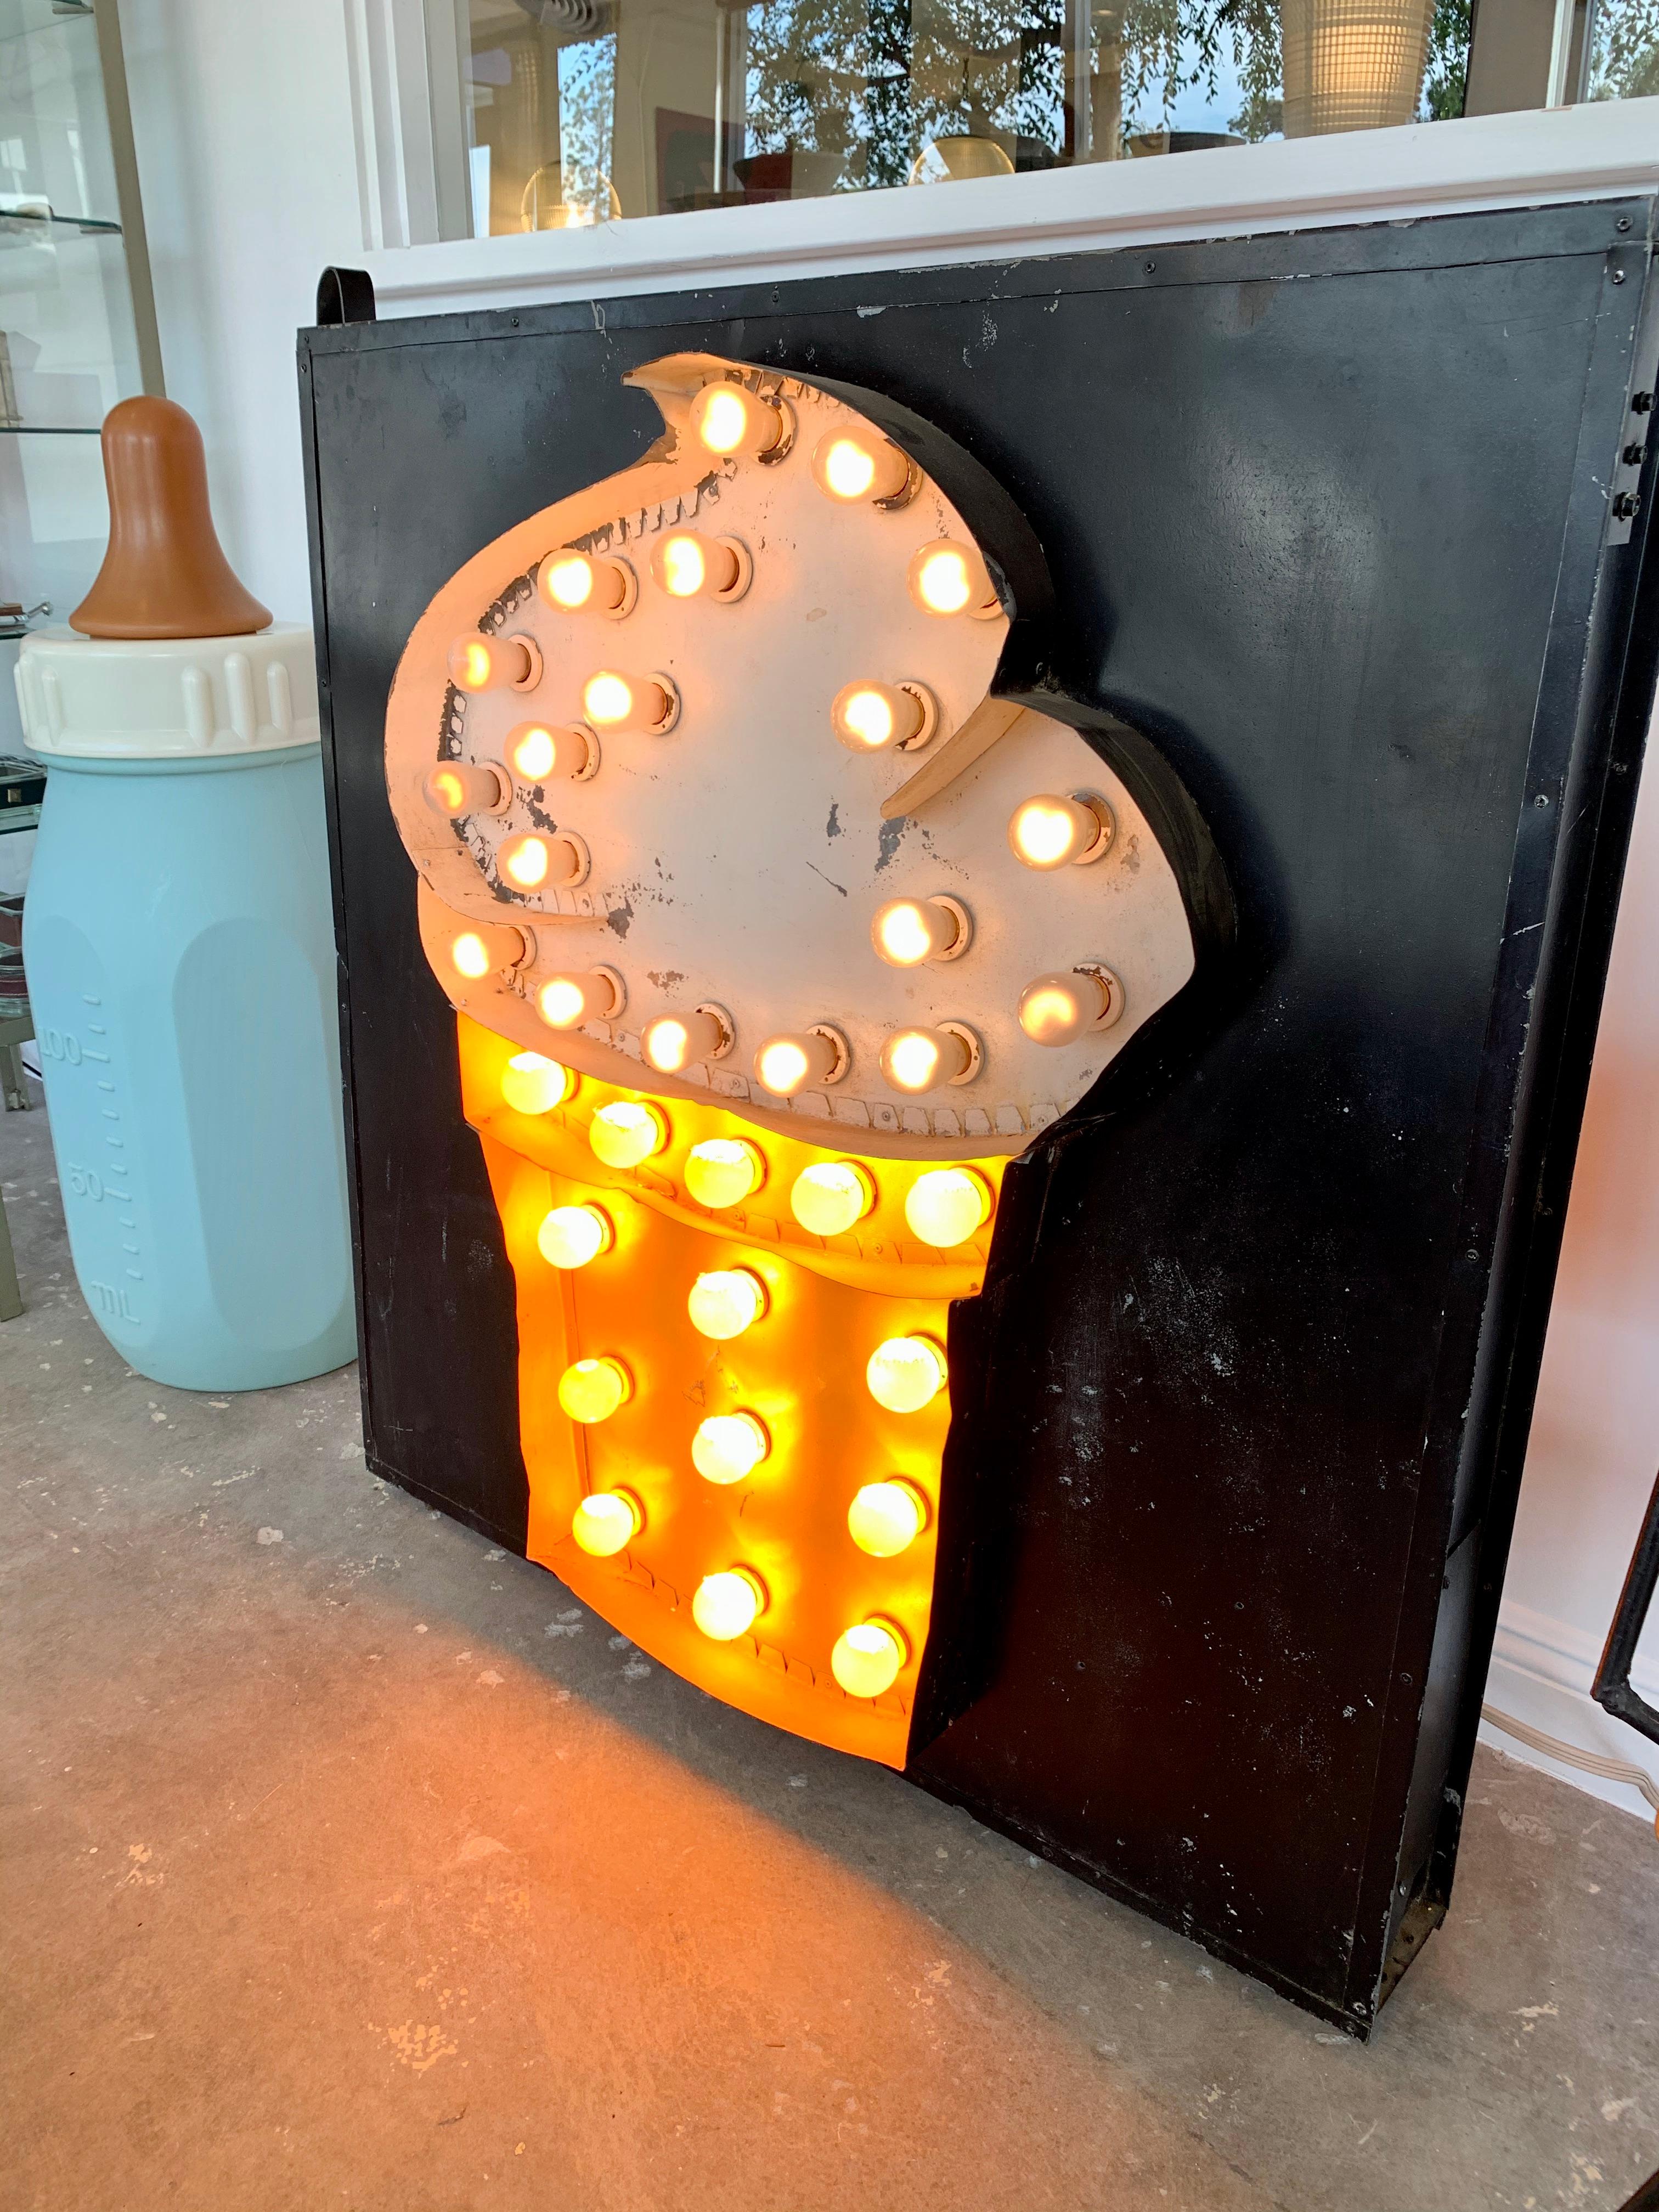 1950s double-sided metal sign with an ice cream cone. Made of sheet metal. Each side has a hand painted ice cream cone with sheet metal outlining the shape. A total of 34 light bulbs illuminate each side. Very cool piece of pop art. Great vintage